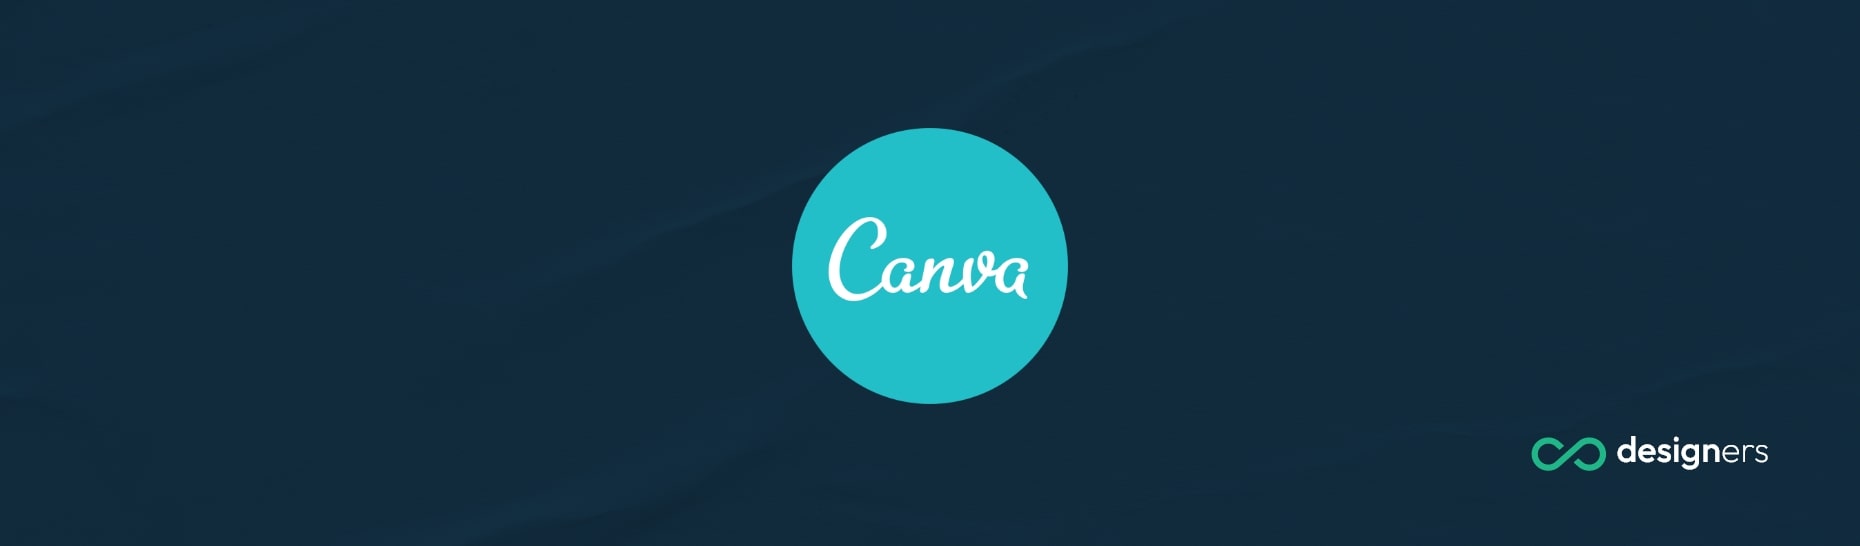 Why Is My Video Taking So Long to Download on Canva?